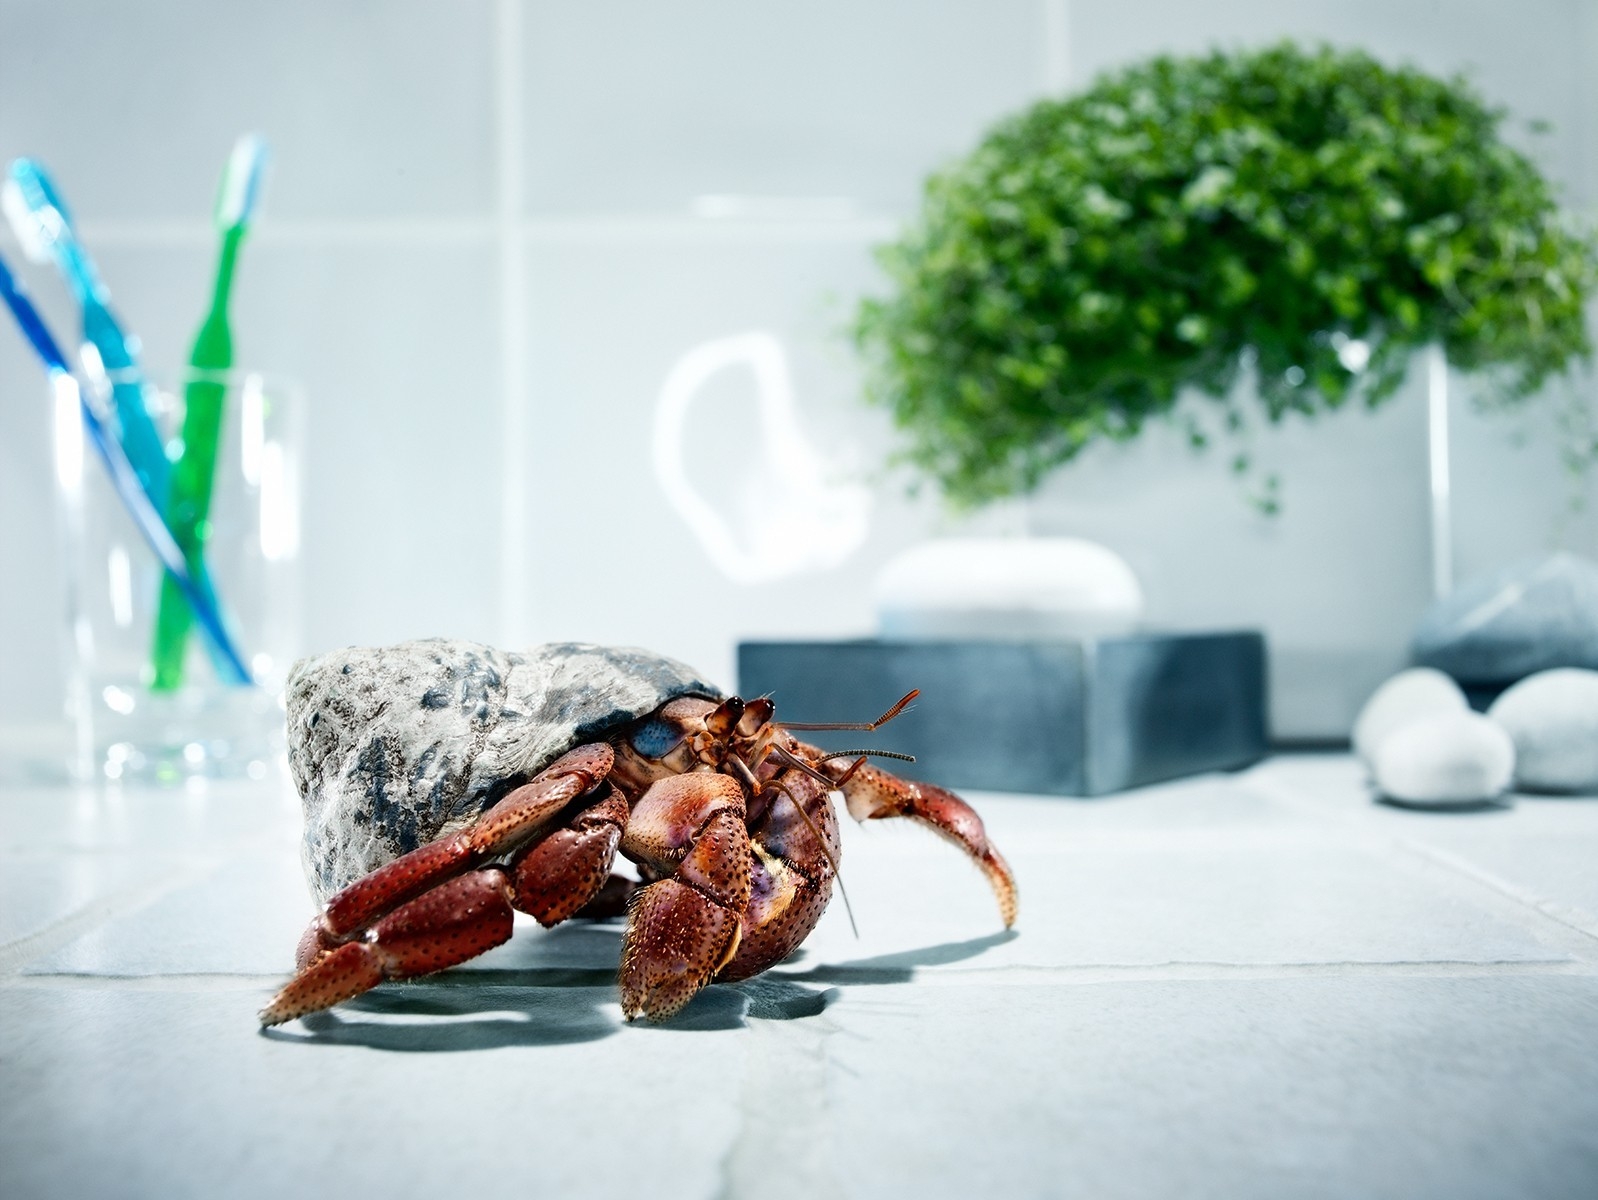 crab, animals, glass, nice, paws, carapace, shell, climb, nicely, toothbrushes